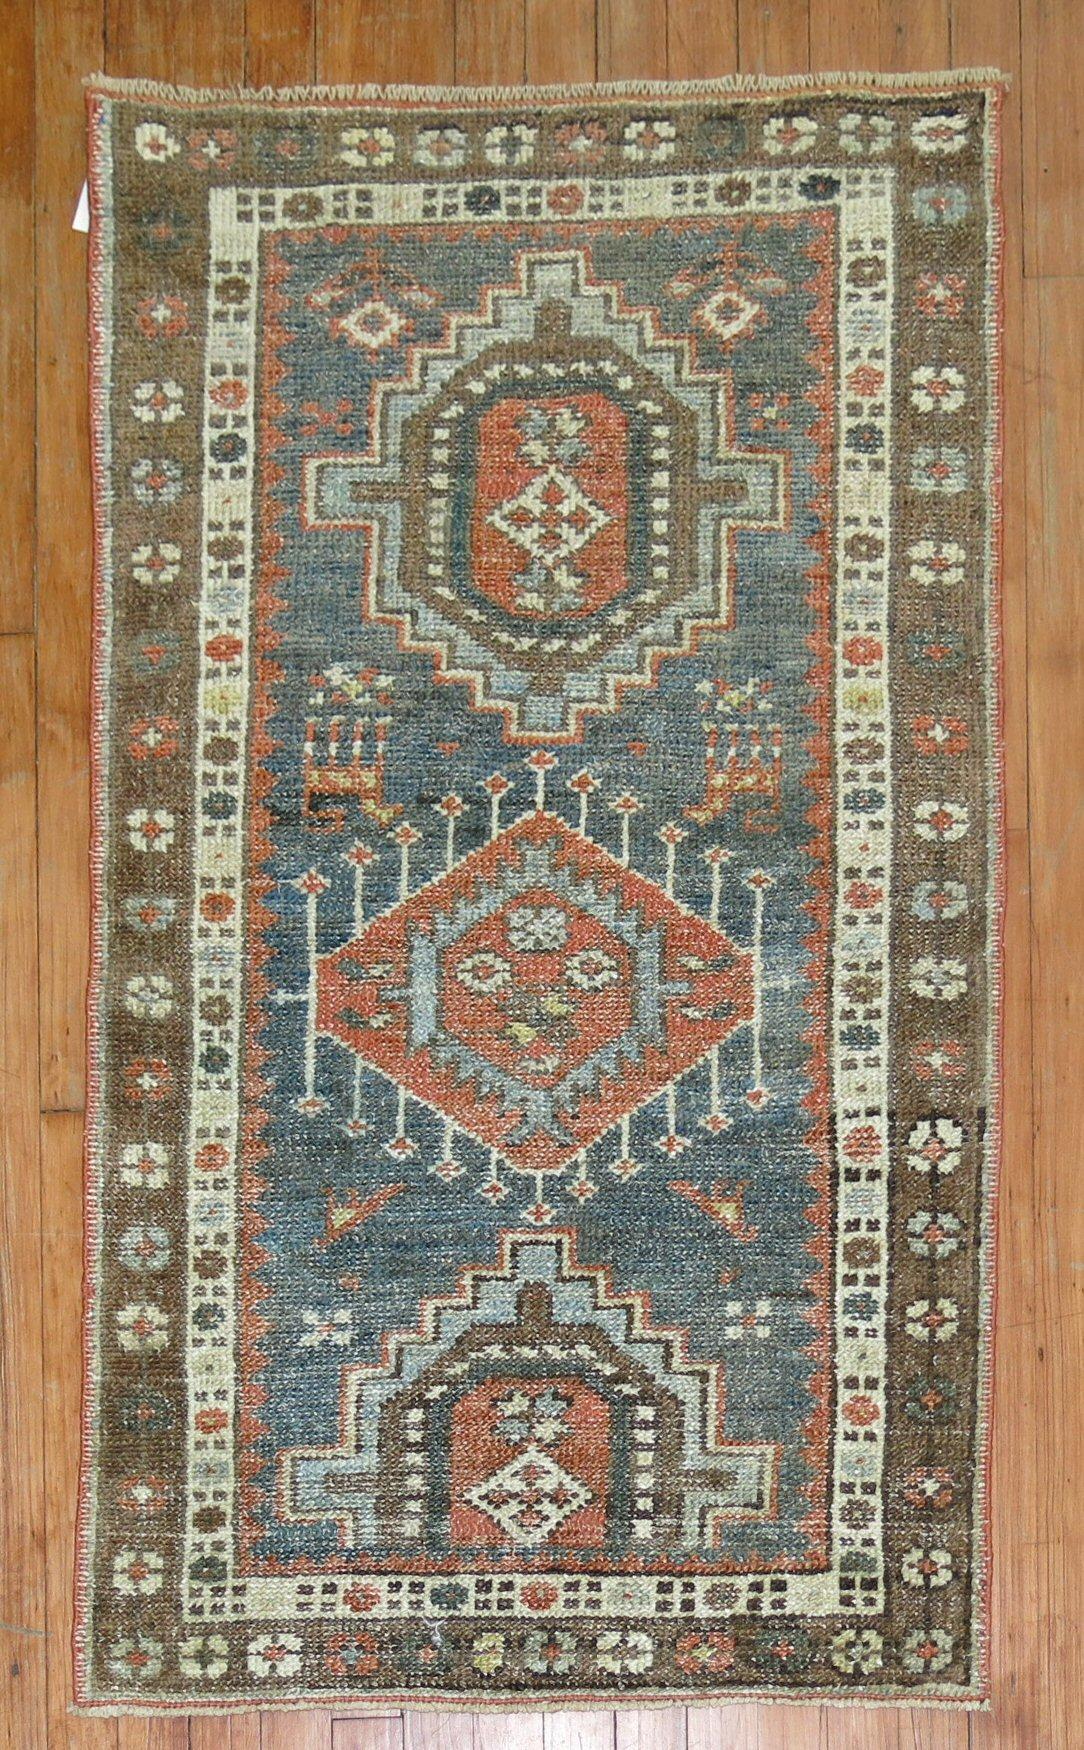 Persian Heriz Tribal scatter rug in rustic tones from the early 20th century

Measures: 2'5” x 4'1”.